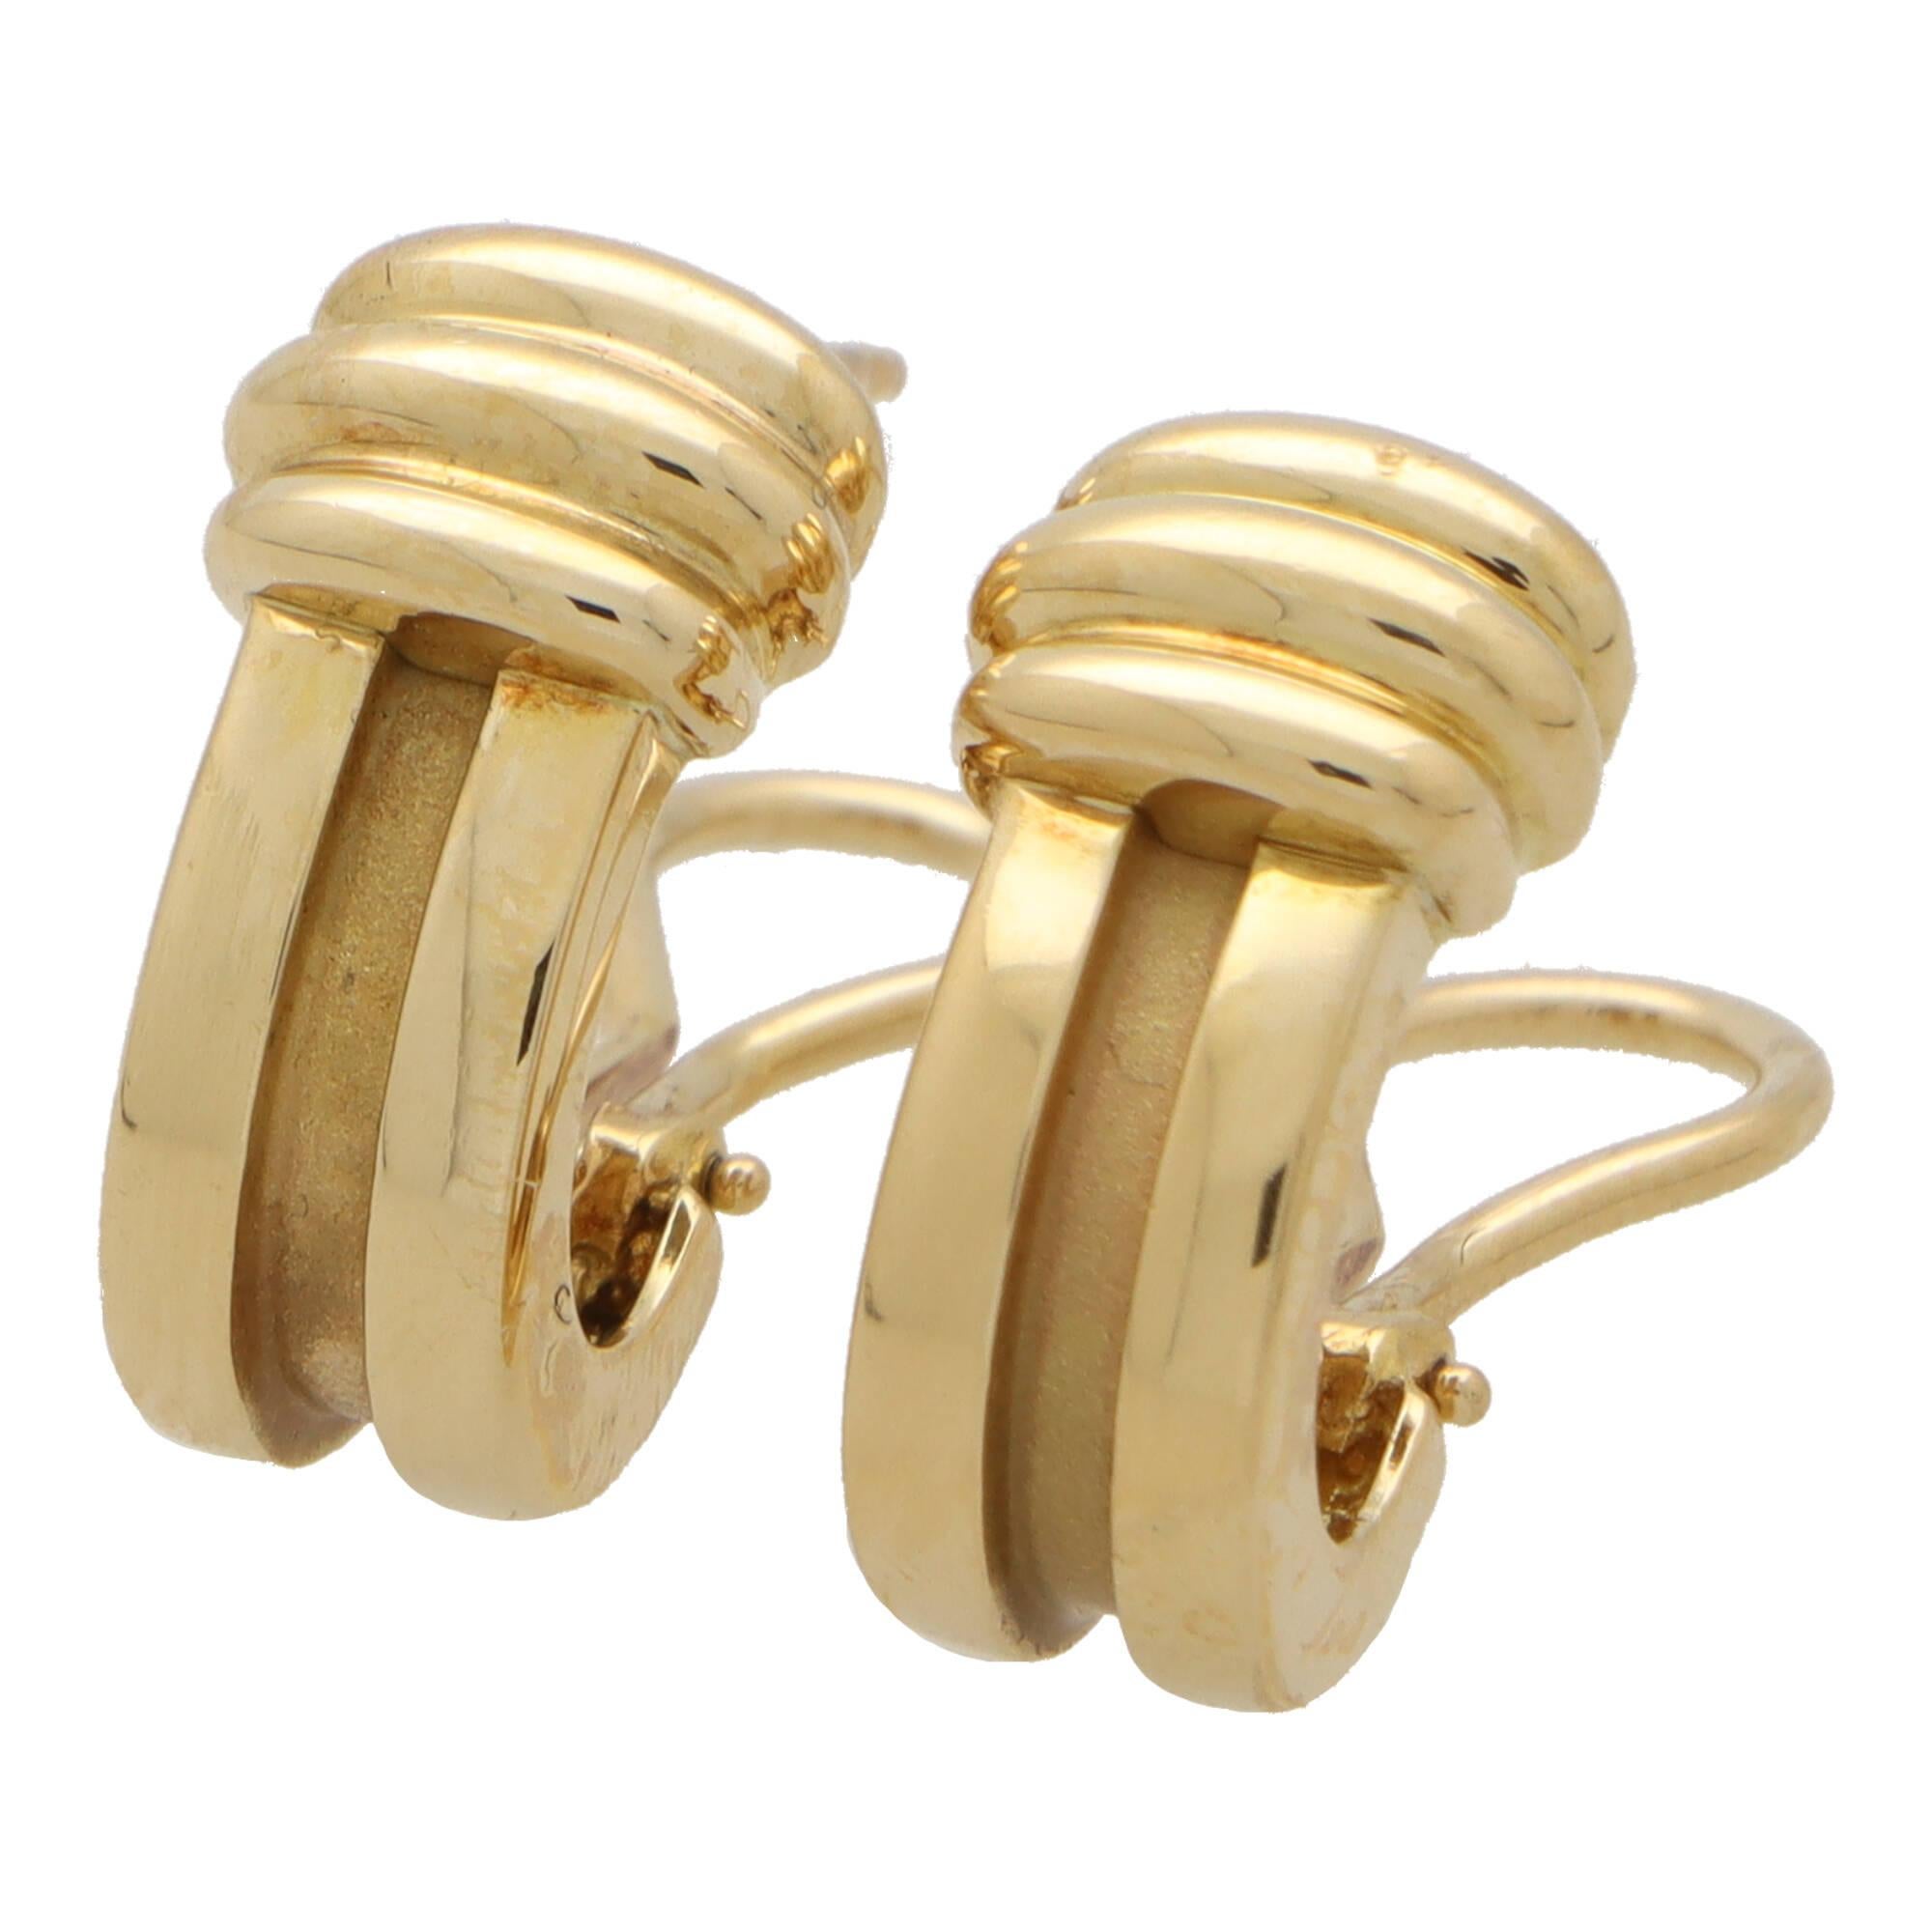 A lovely vintage pair of Tiffany & Co. ‘Atlas Grove’ earrings set in 18k yellow gold.

From a discontinued collection; each earring is composed of a ridged half hoop design; capped to the top with yellow gold ridges. Both earrings are secured to